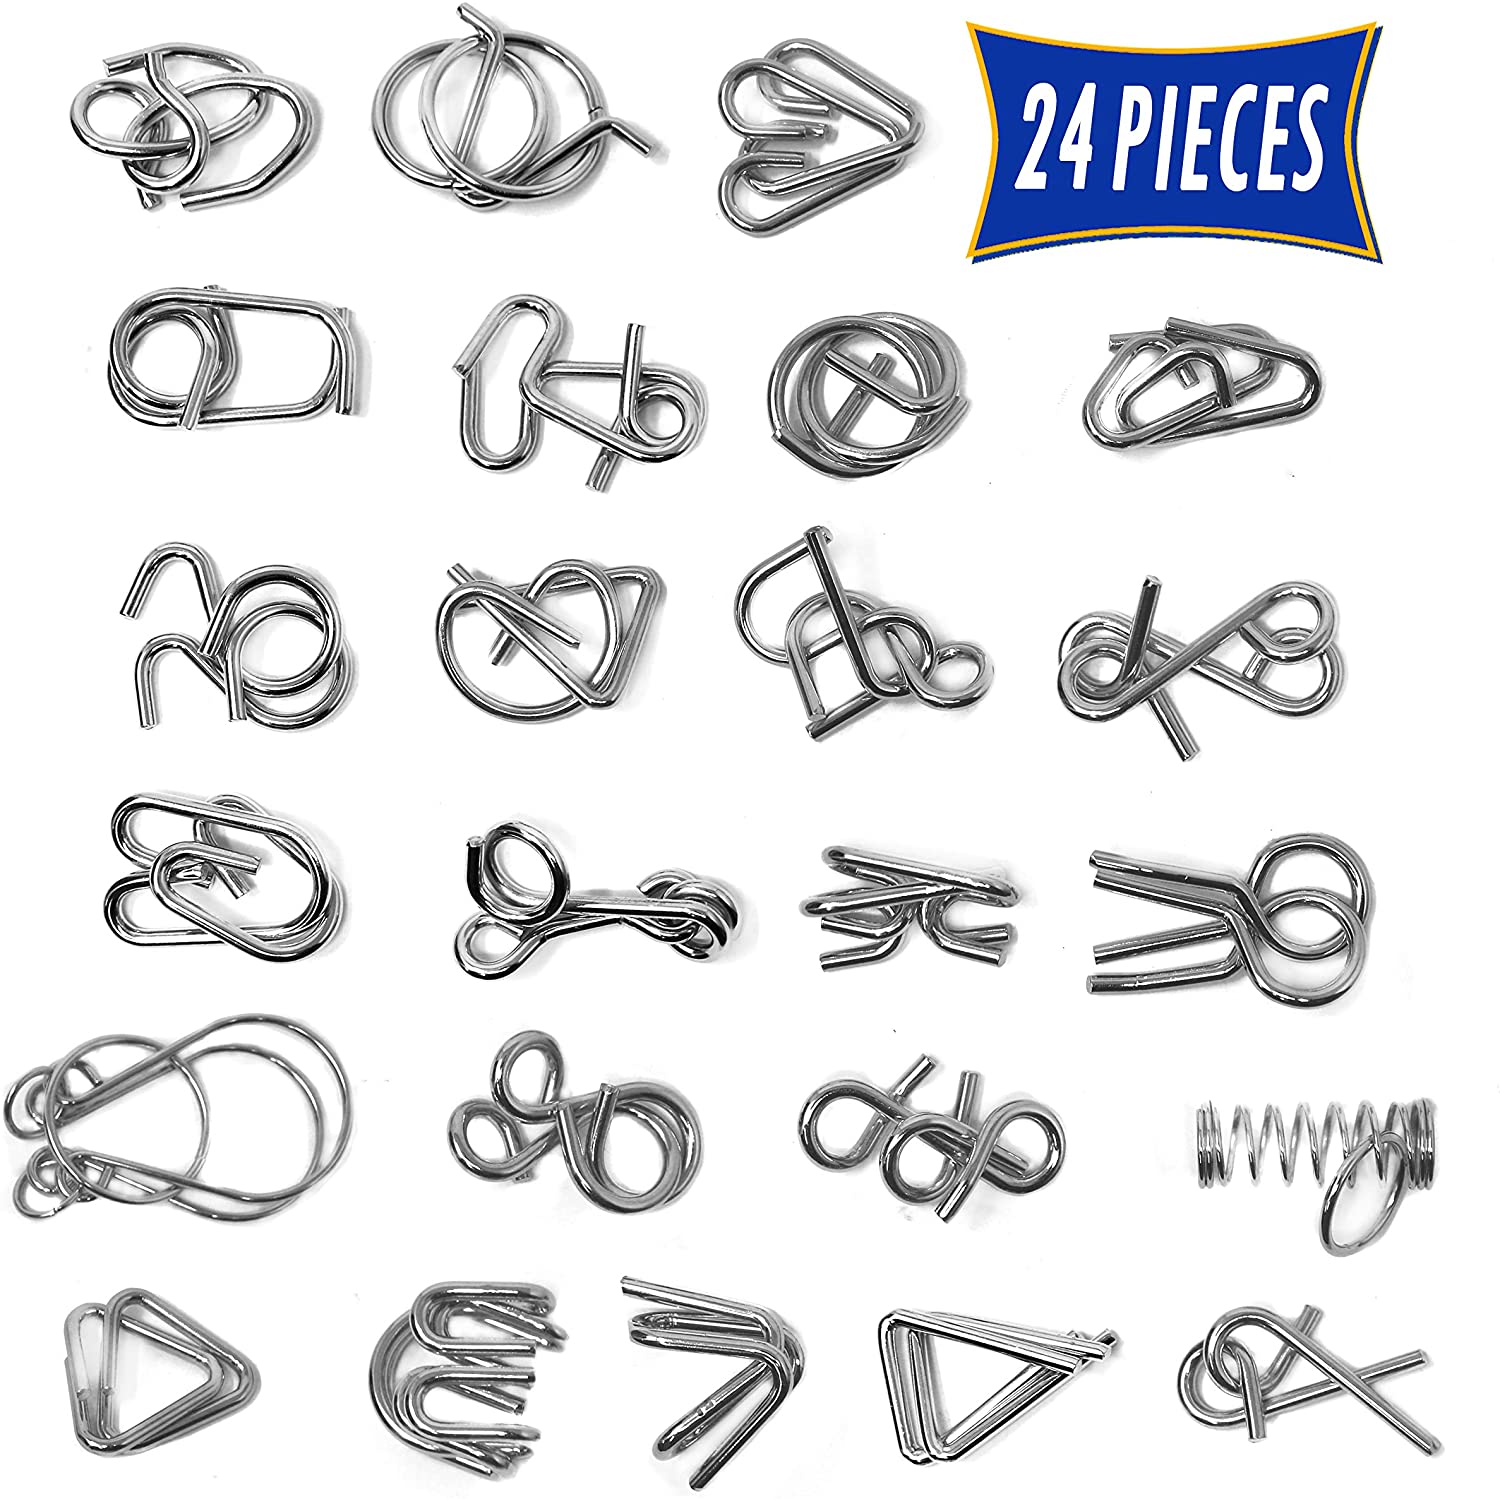 Party Favors Disentanglement Puzzle Unlock Interlock Toys IQ Puzzle Brain Teaser Set of 24 Prizes Brain Teasers Metal Wire Puzzle Toys Assorted Metal Puzzle Toys for Gifts 